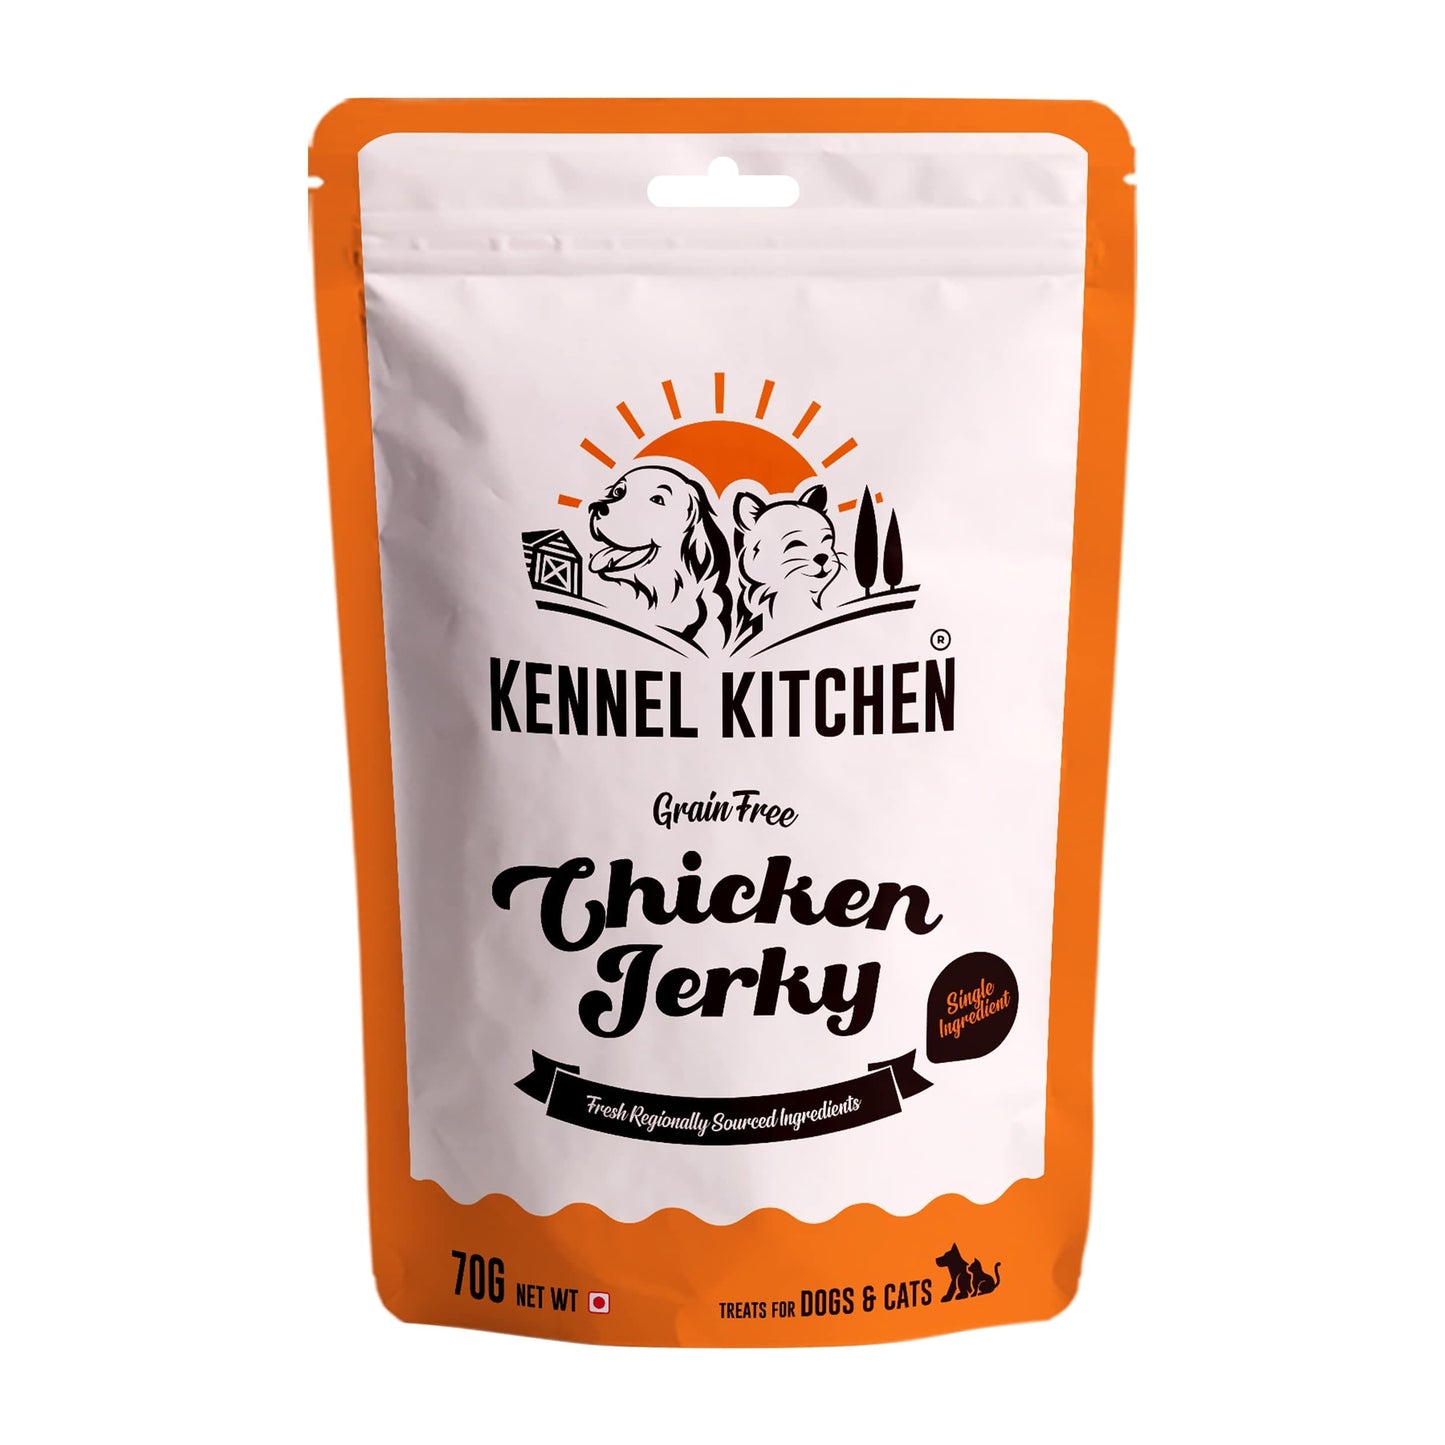 Kennel Kitchen Chicken Jerky For Dogs - 70g each (pack of 3)